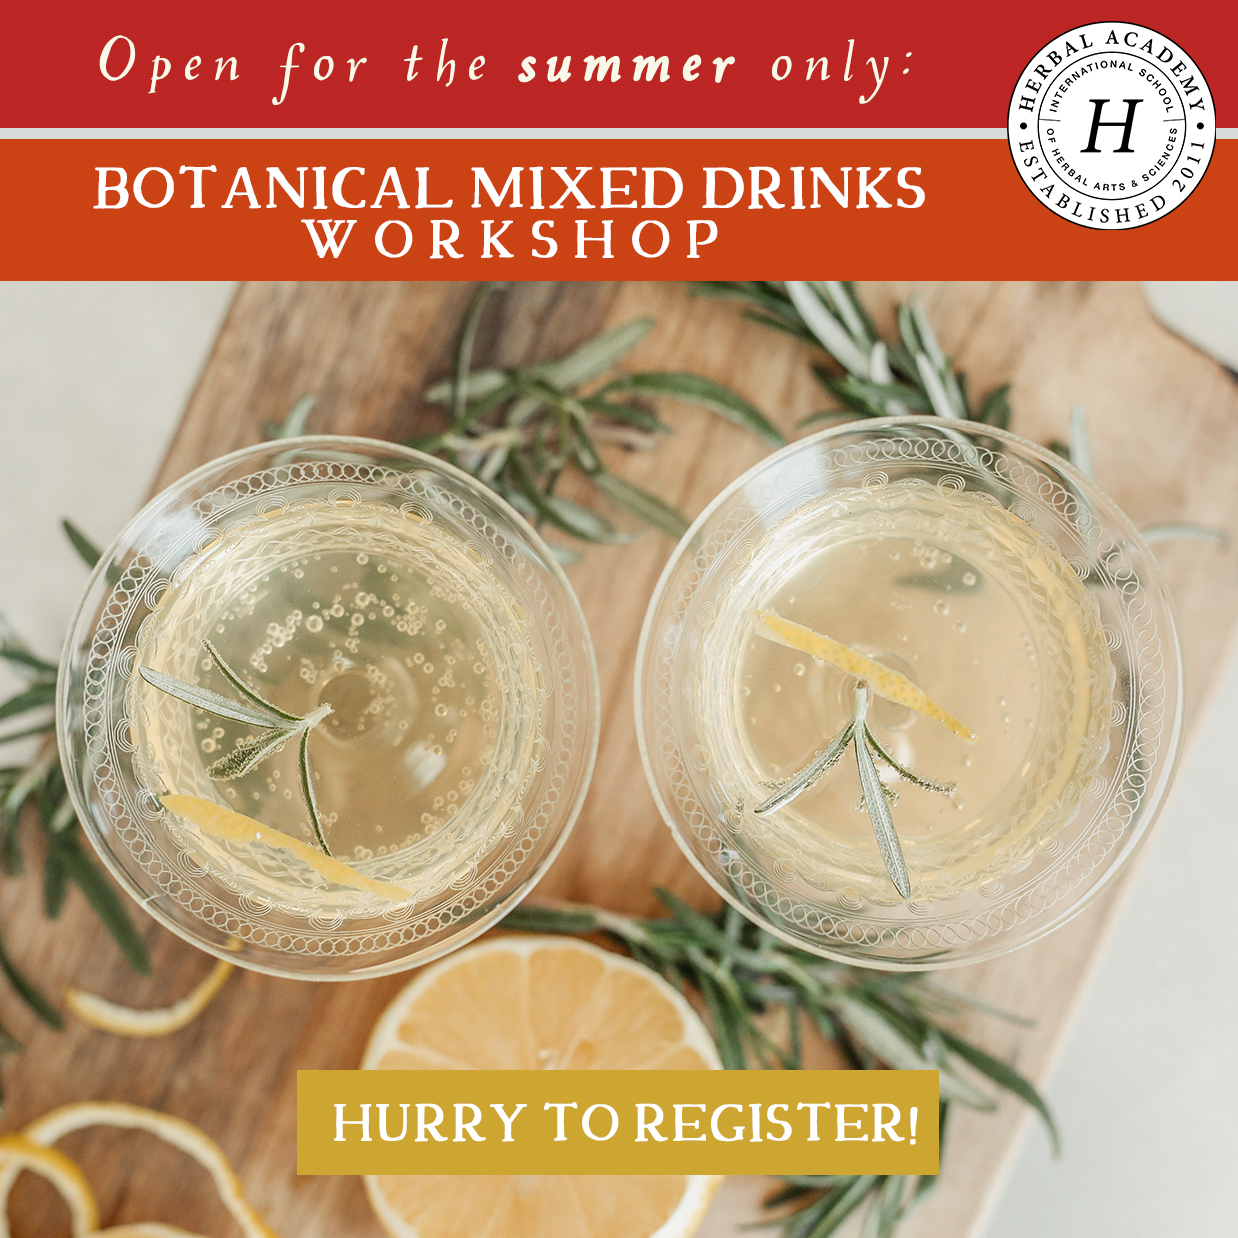 Enroll now in the Botanical Mixed Drinks Workshop!